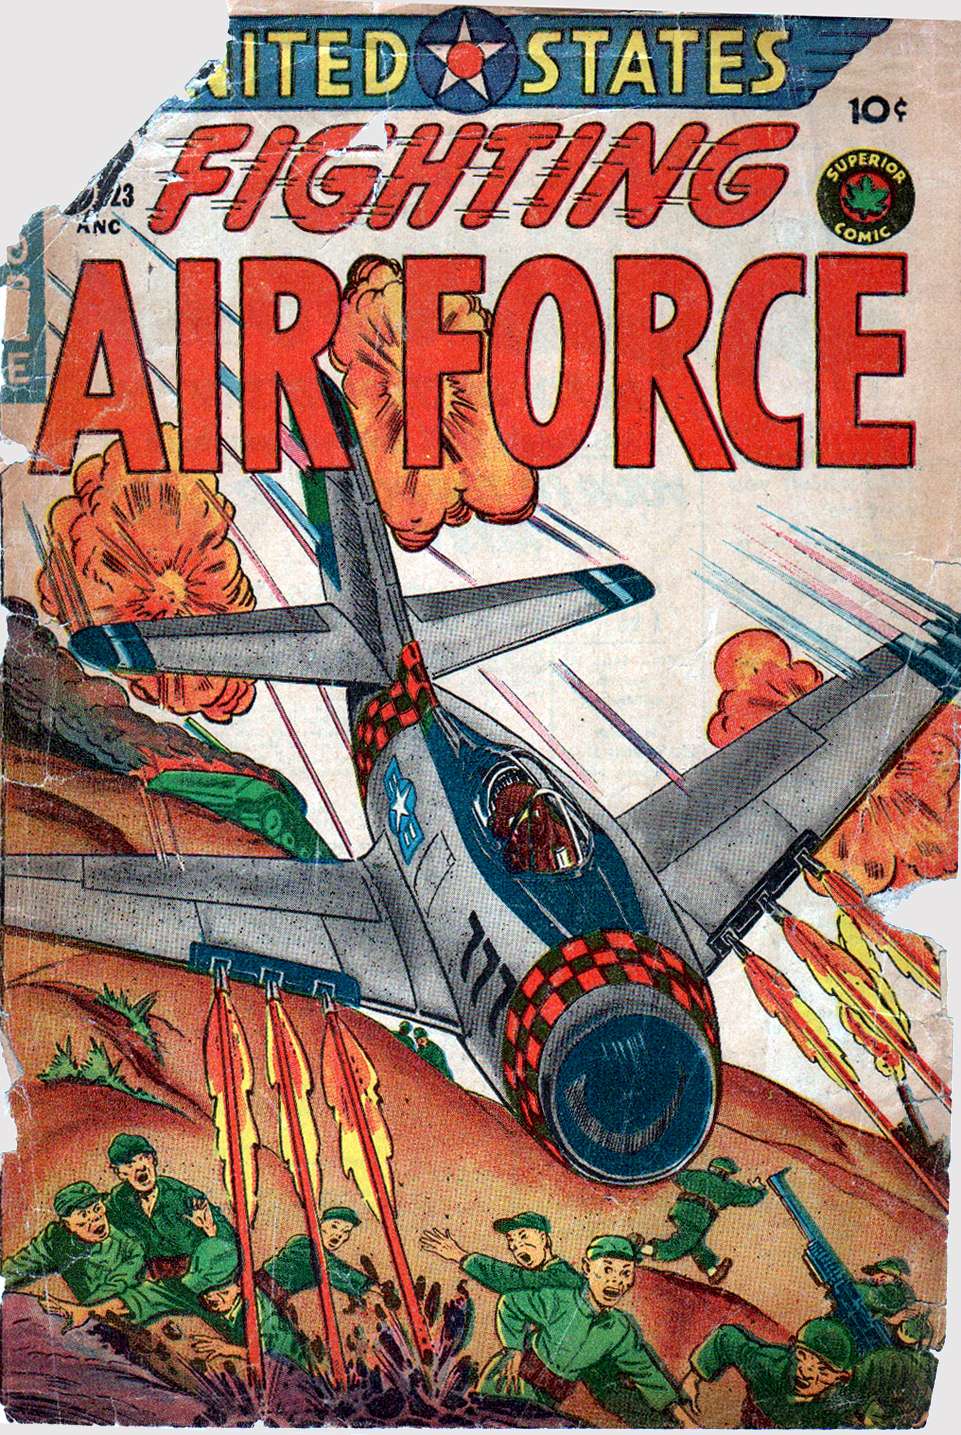 Book Cover For U.S. Fighting Air Force 23